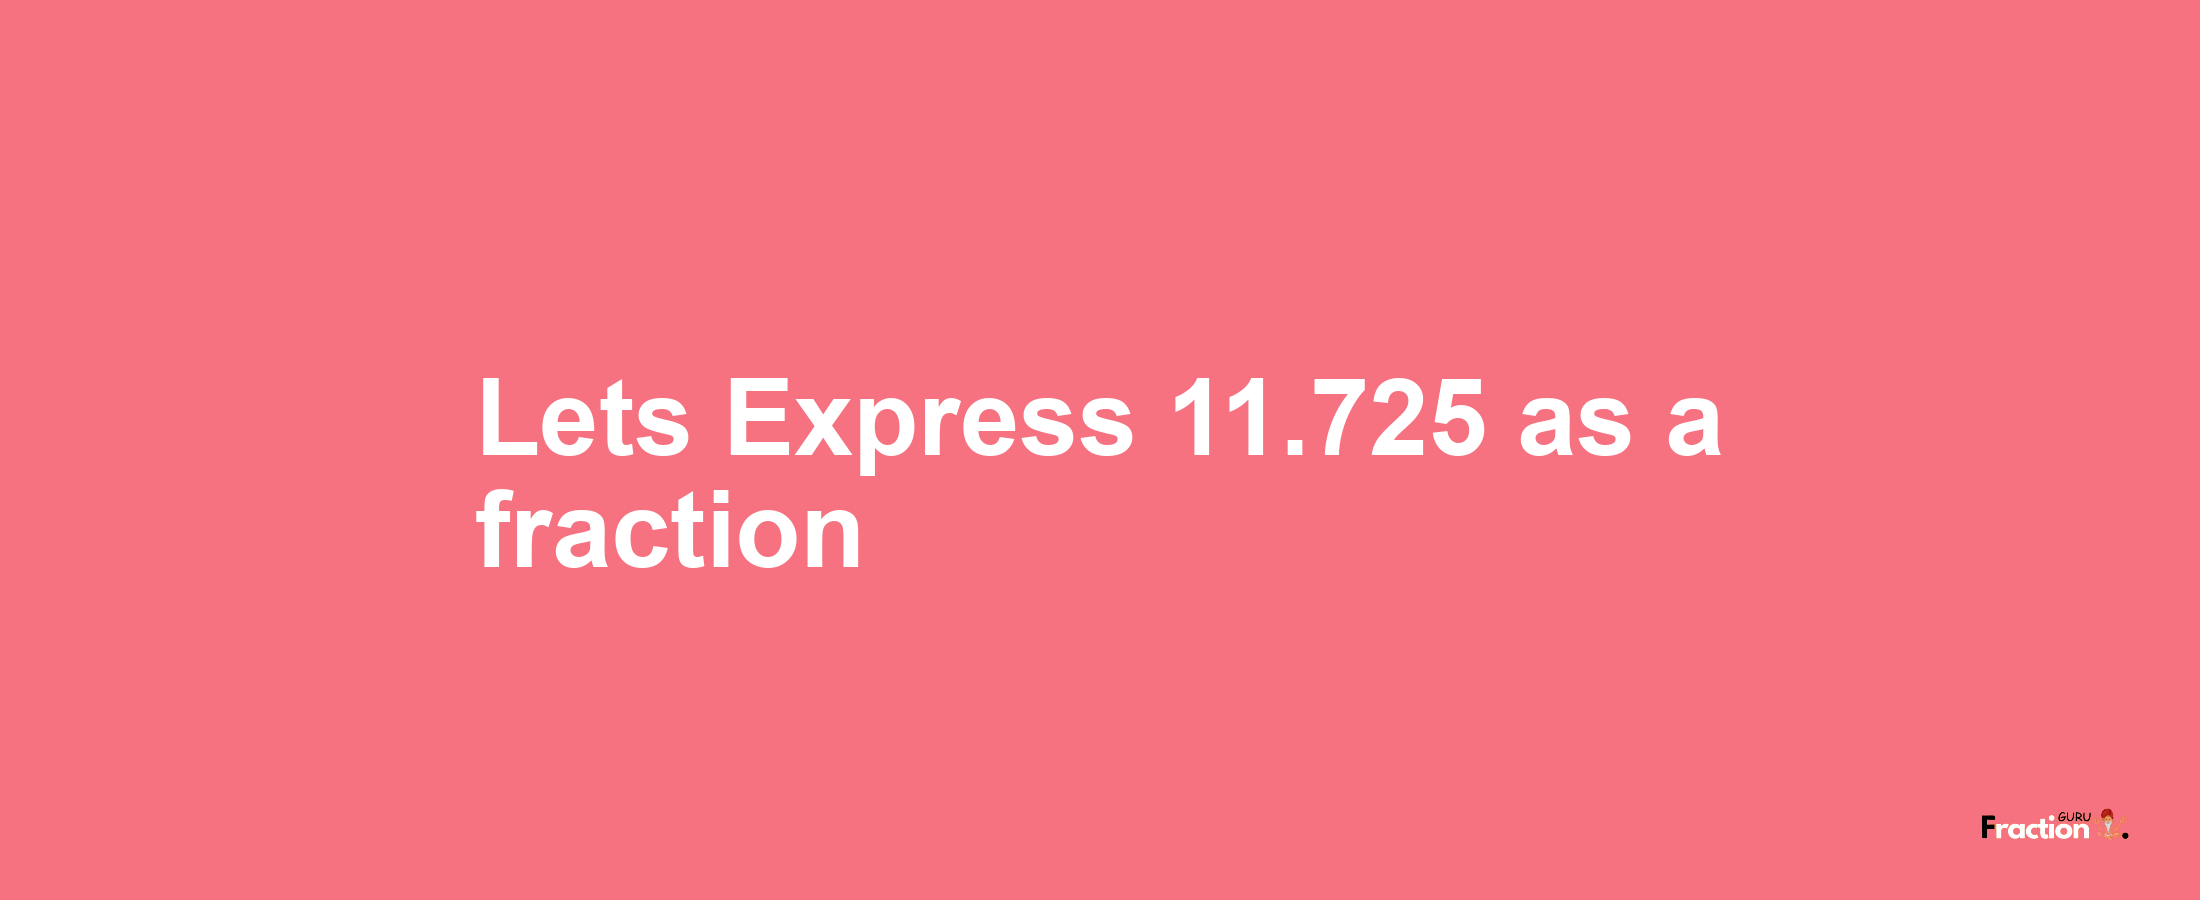 Lets Express 11.725 as afraction